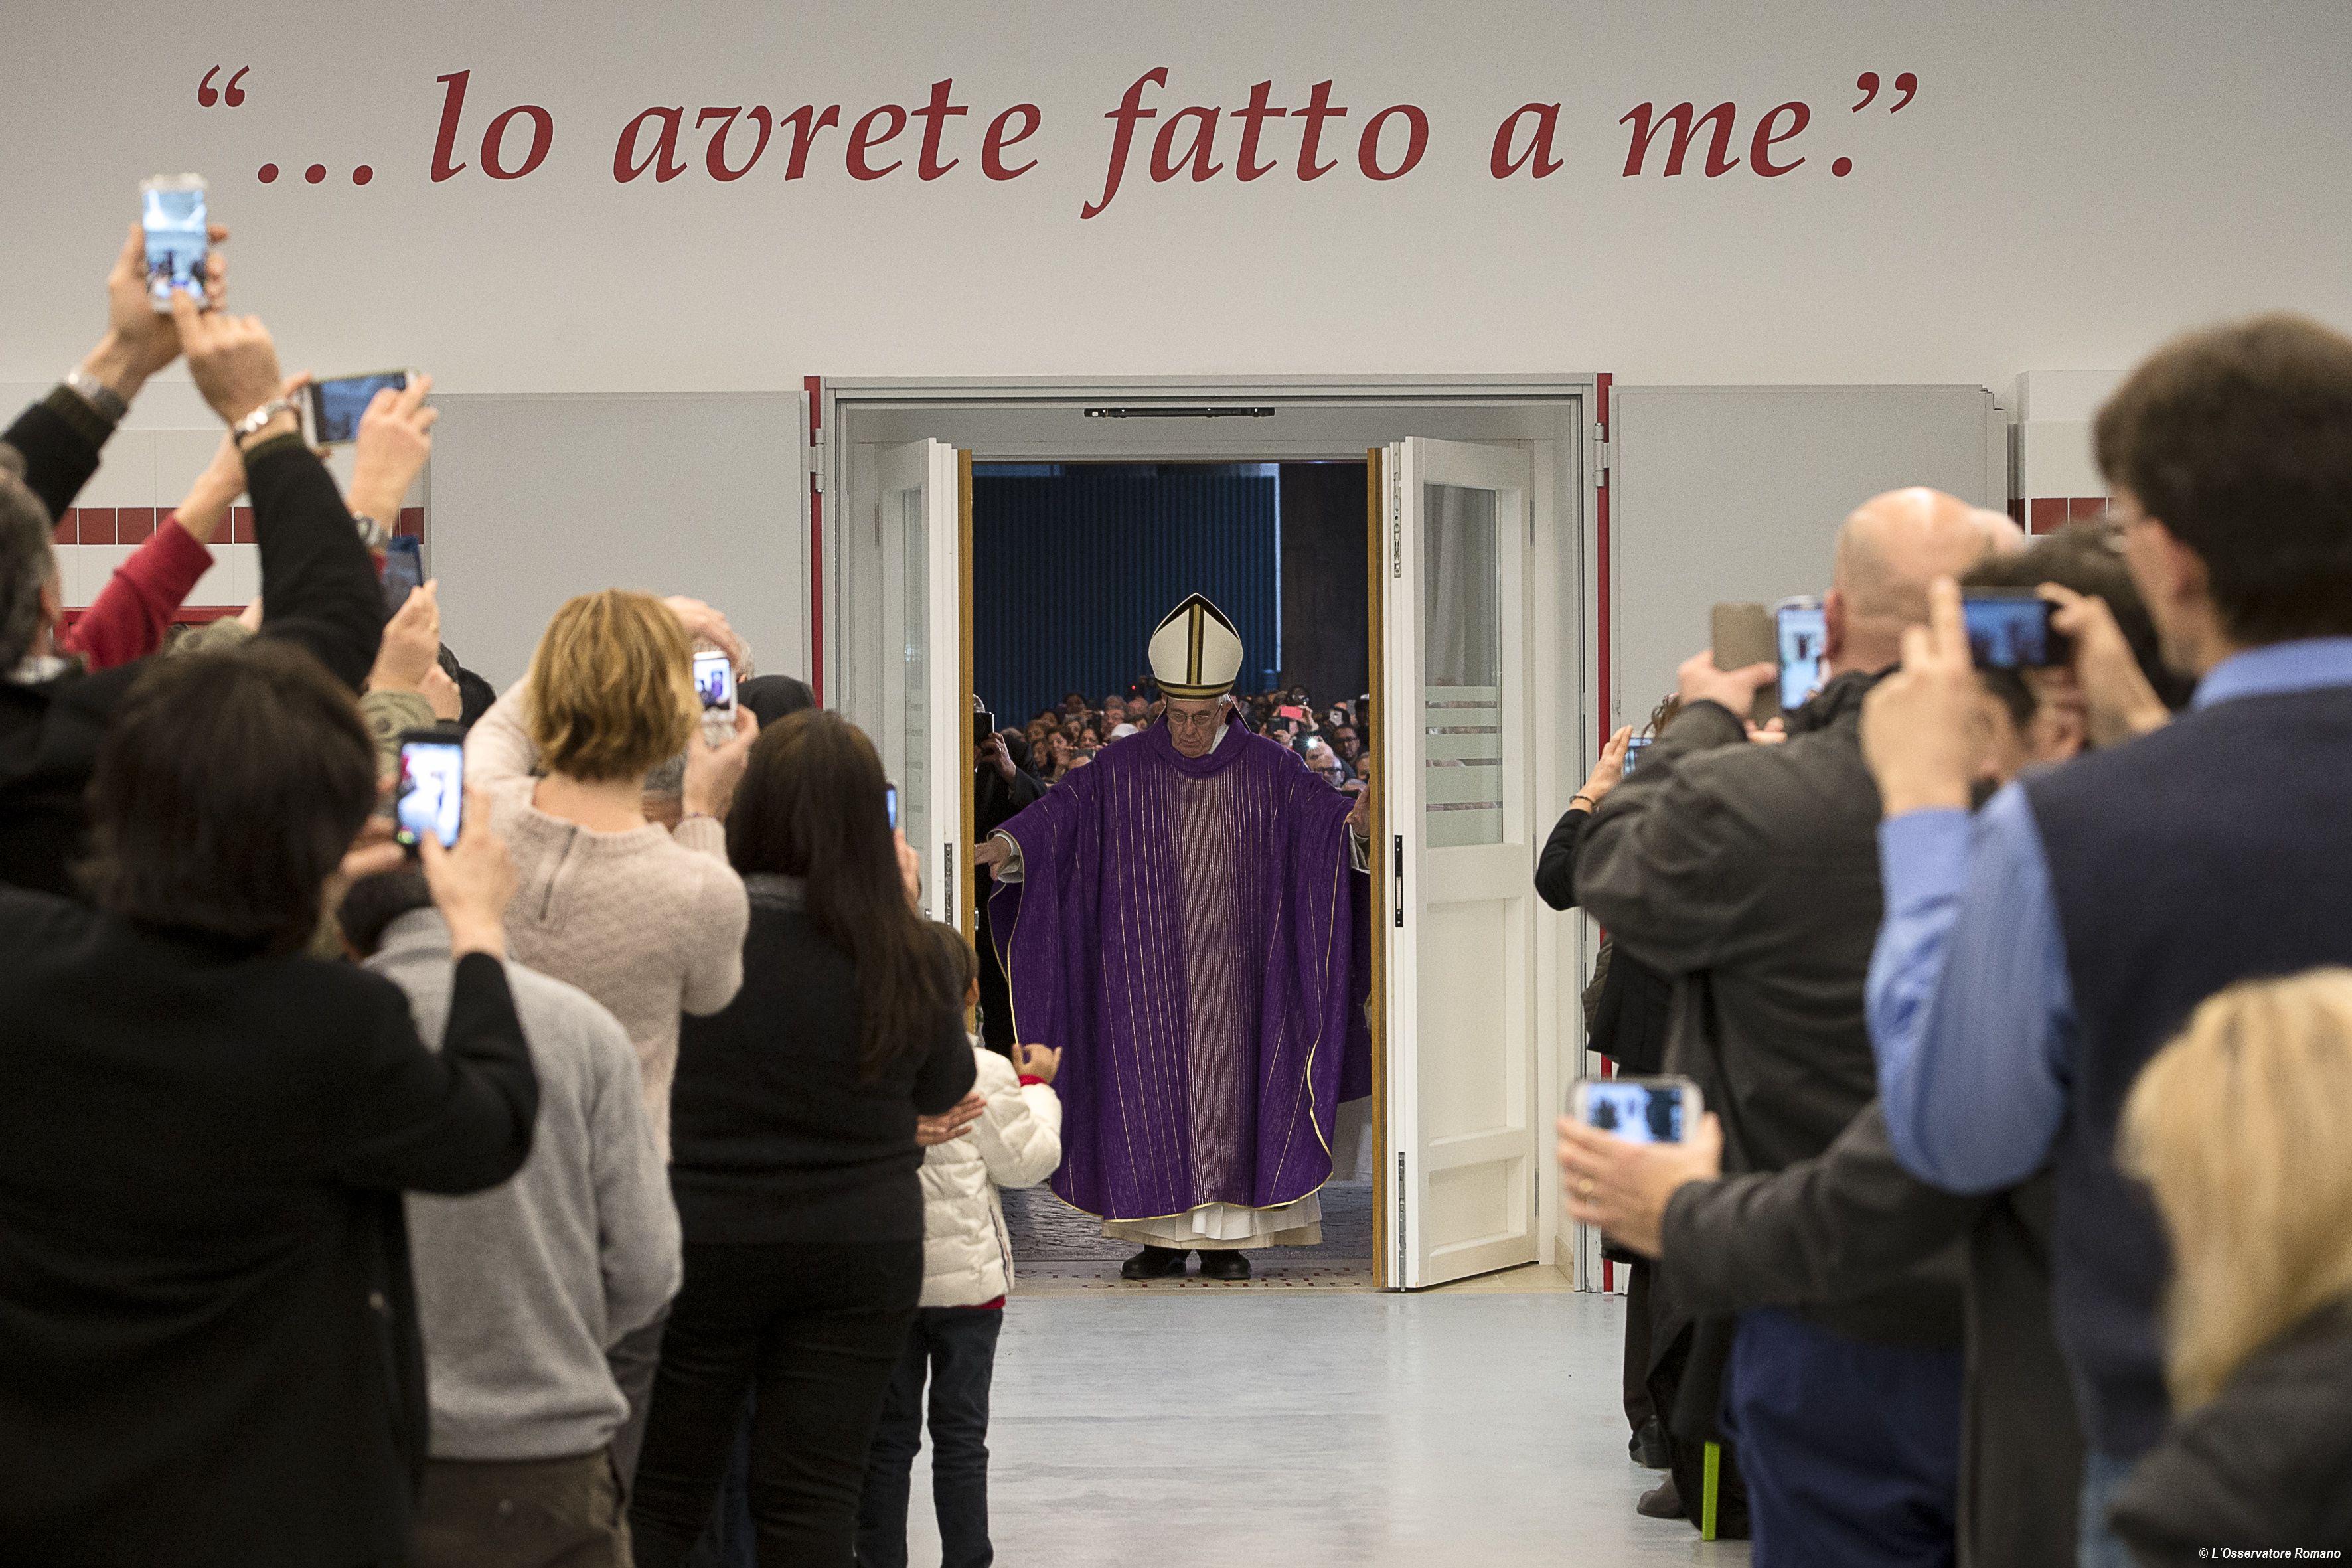 Pope Francis opens the Holy Door at a new homeless shelter in Rome’s Termini – John Paul II train station